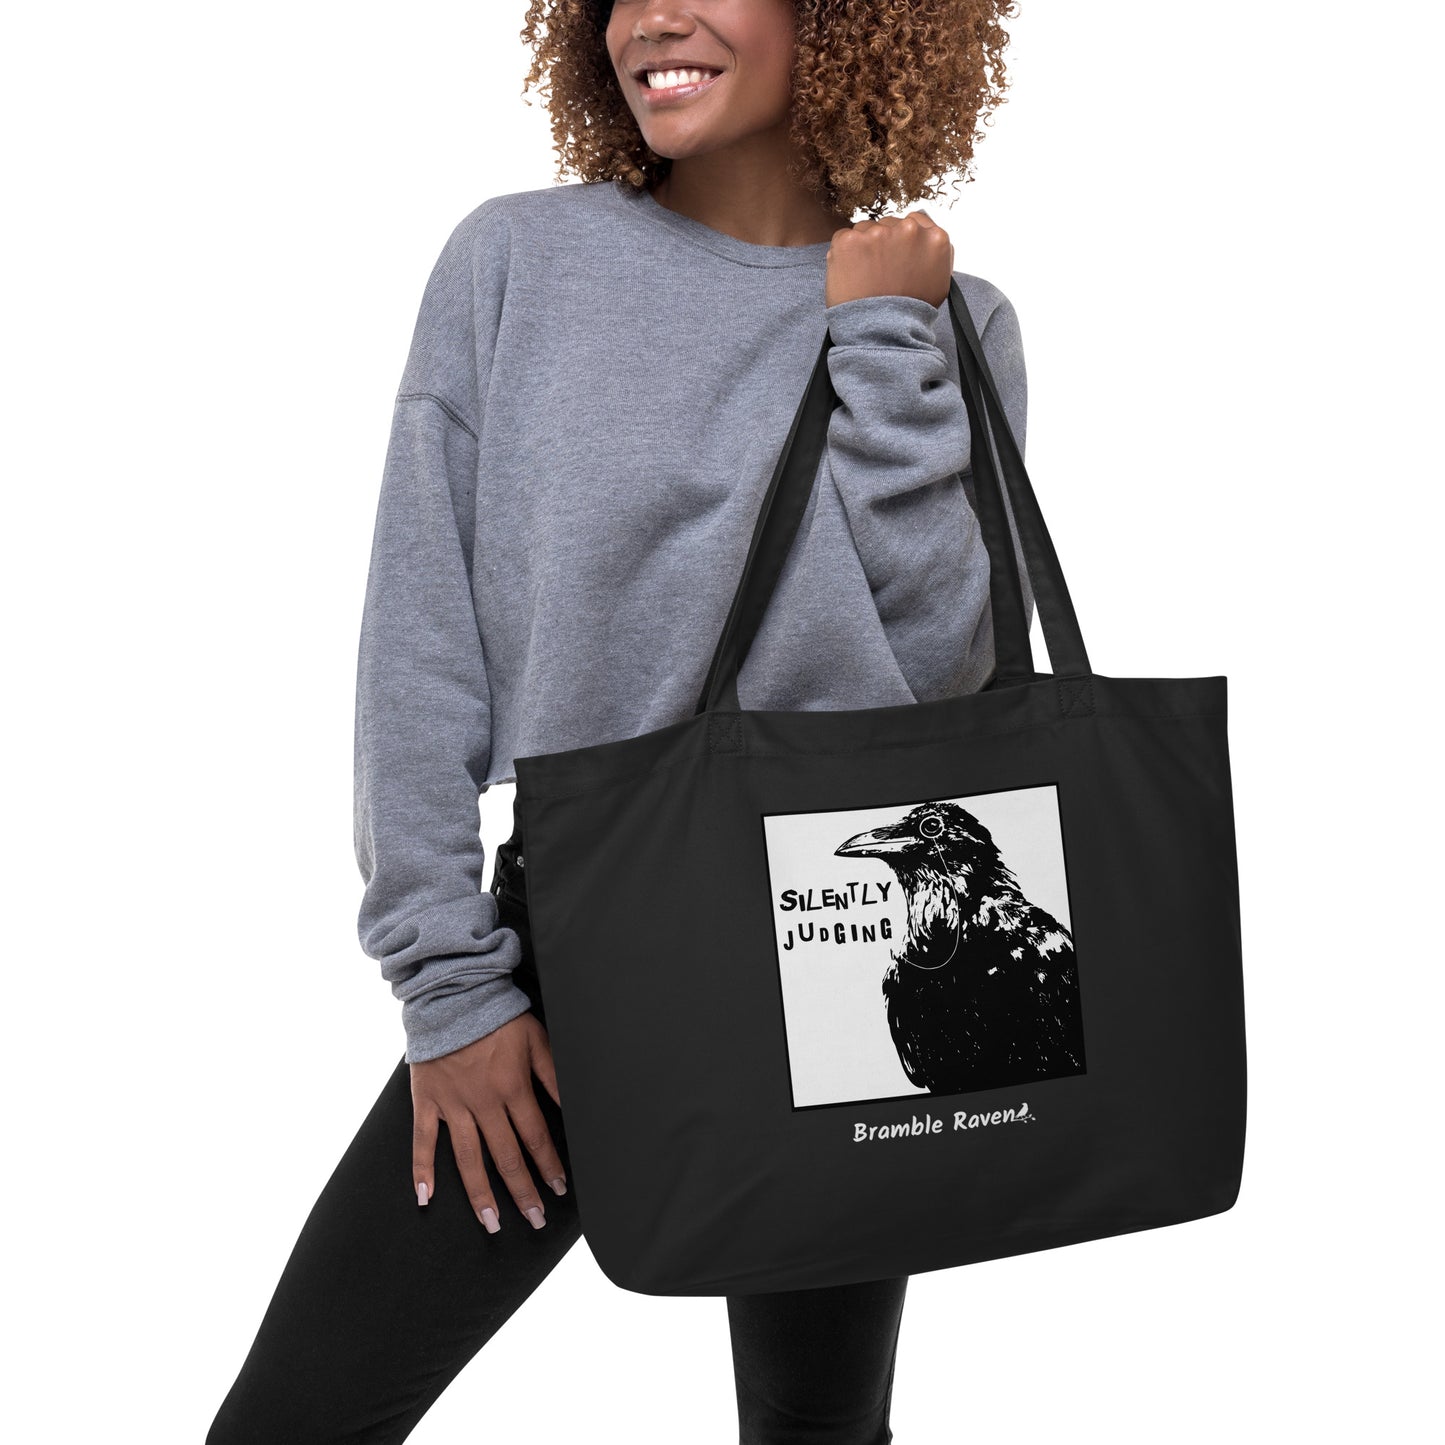 Original Silently Judging crow design. Silently Judging text. Black crow with monocle in square frame. Printed on large black colored eco tote. 20 by 14 by 5 inches. 100% recycled cotton. Shown being held by female model.